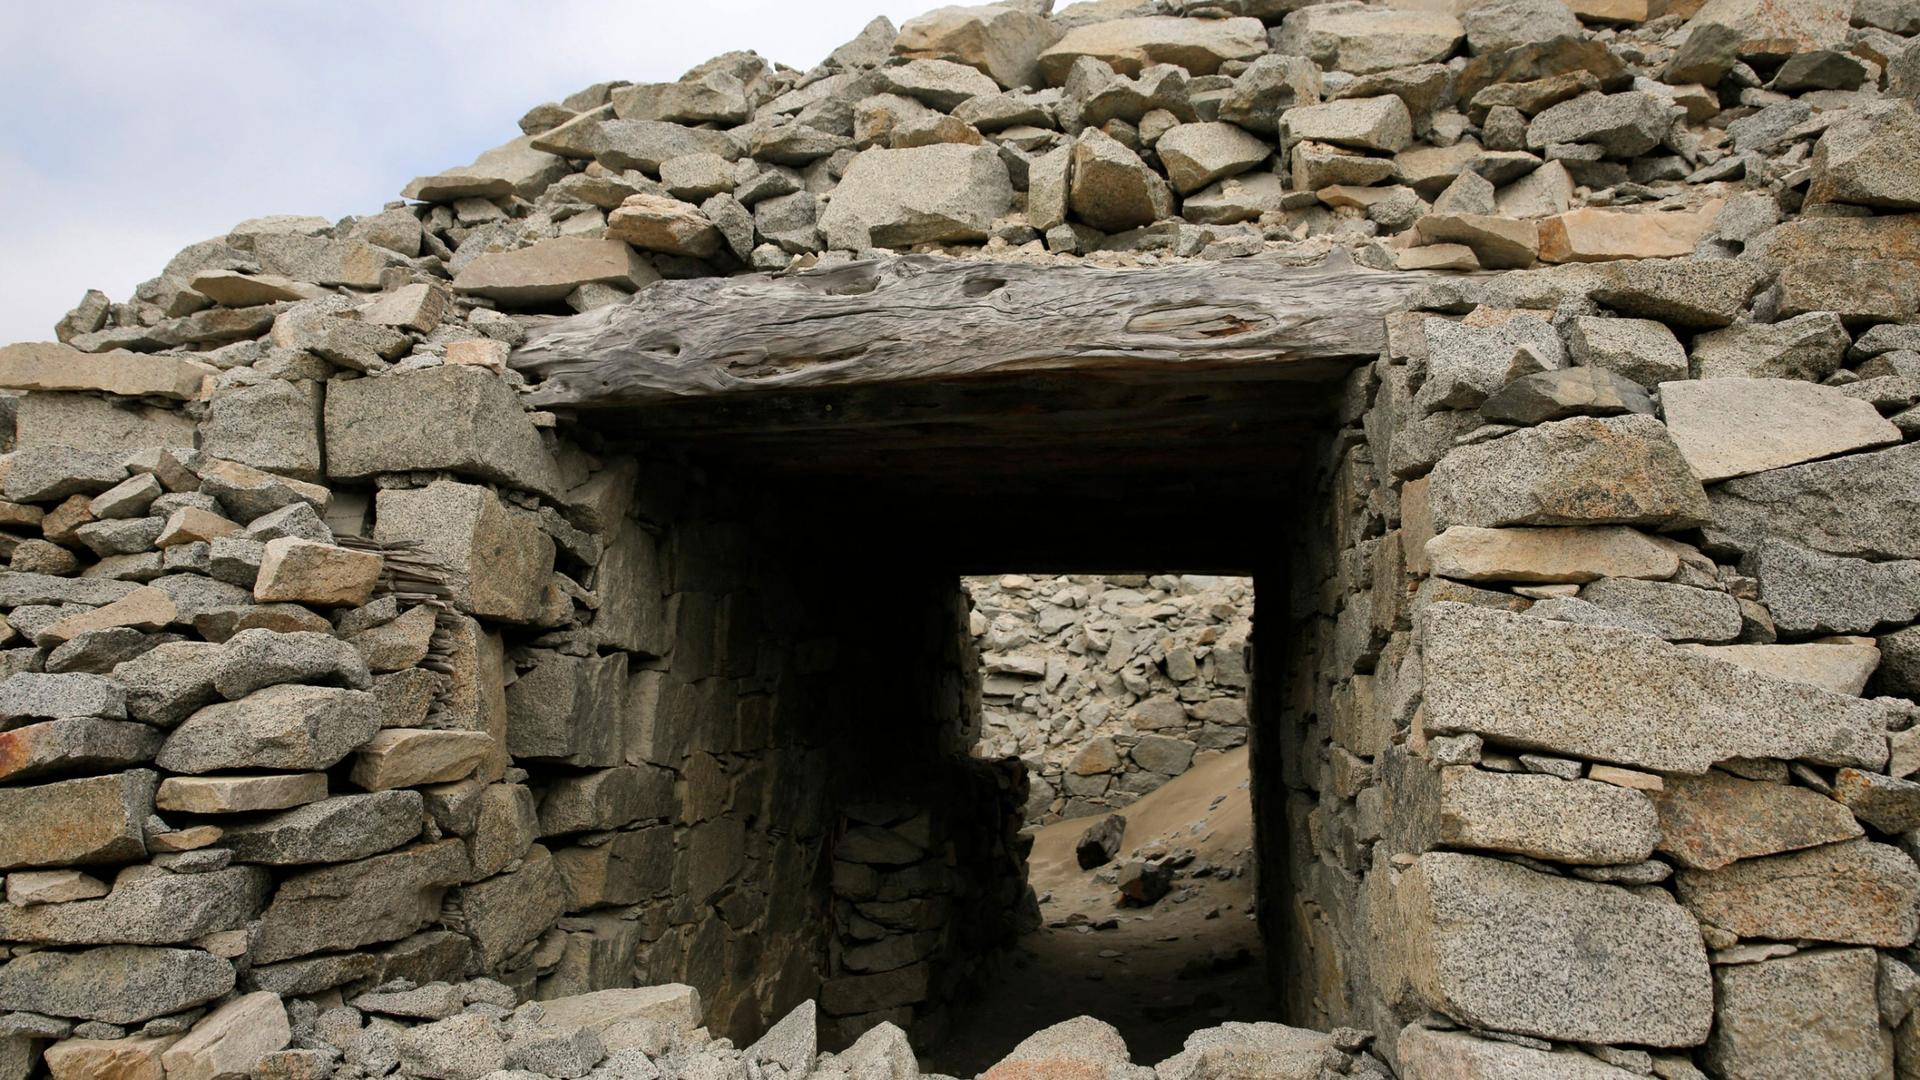 A large pile of stones are shown with a square opening and a passageway.